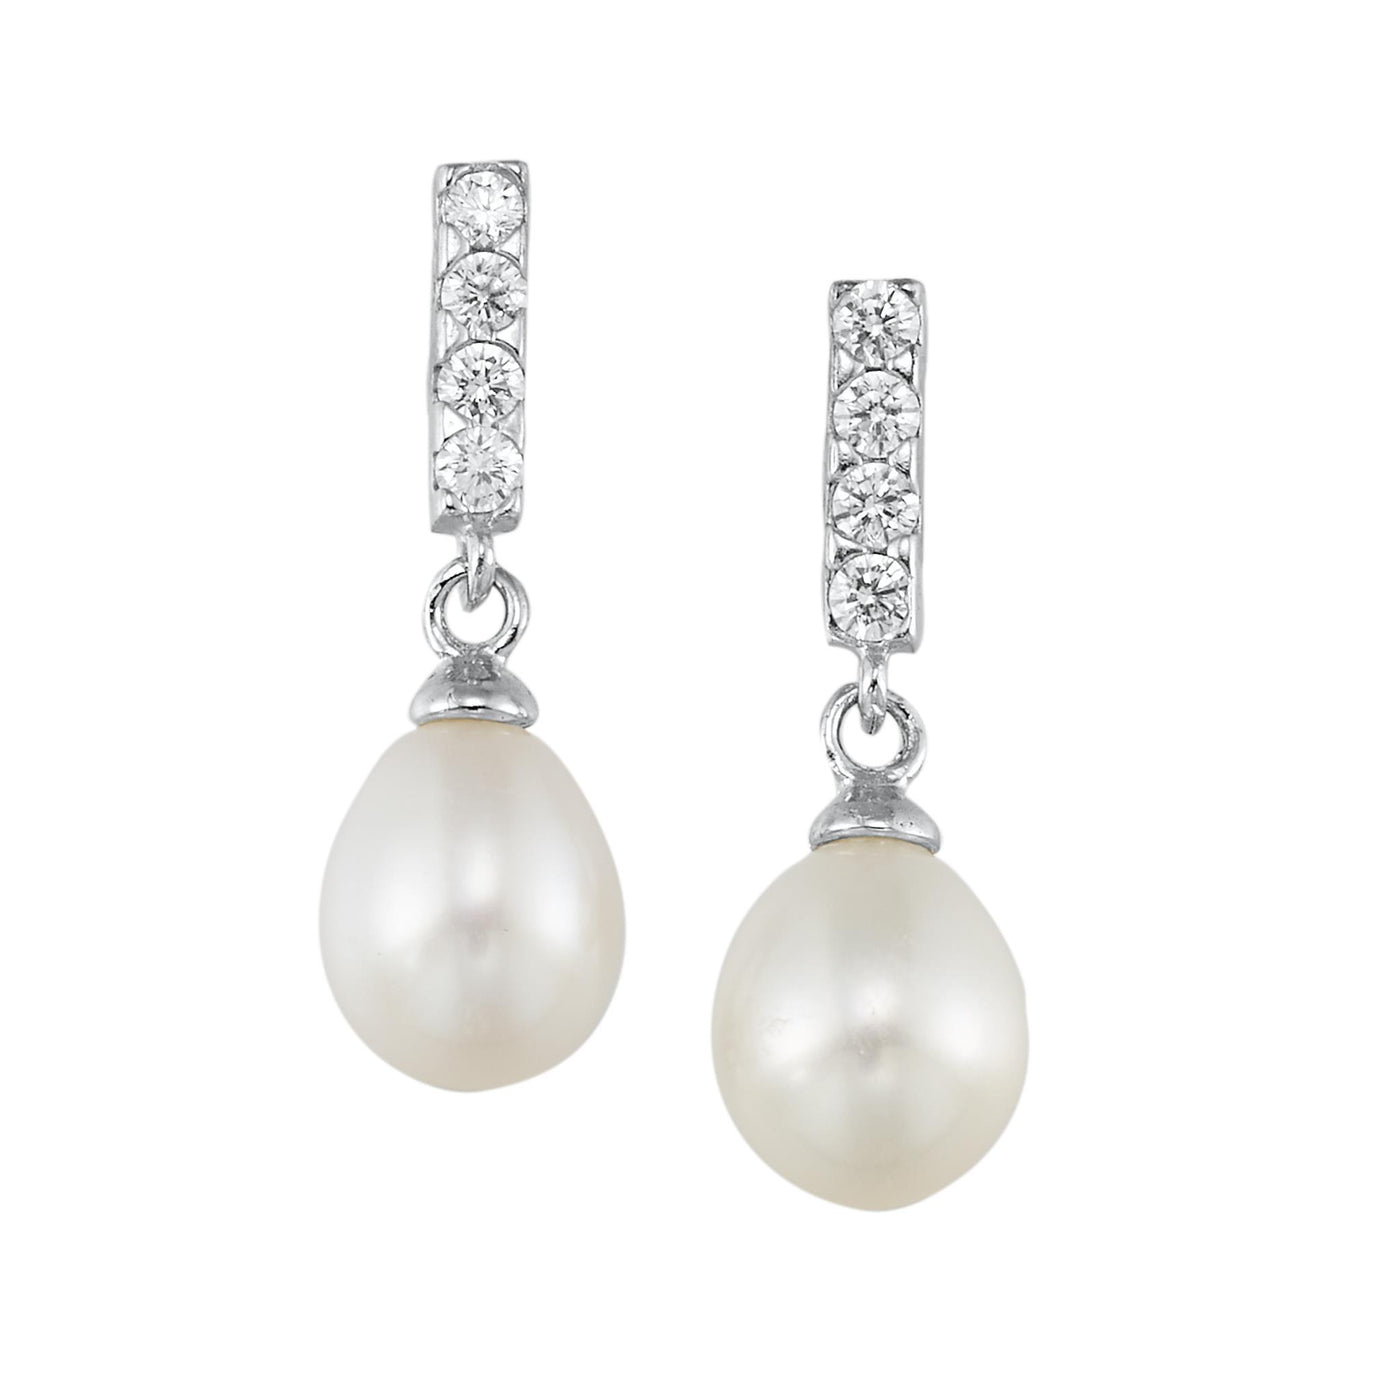 Sterling Silver Dangle Style Earrings Featuring Freshwater Pearls and Cubic Zirconia